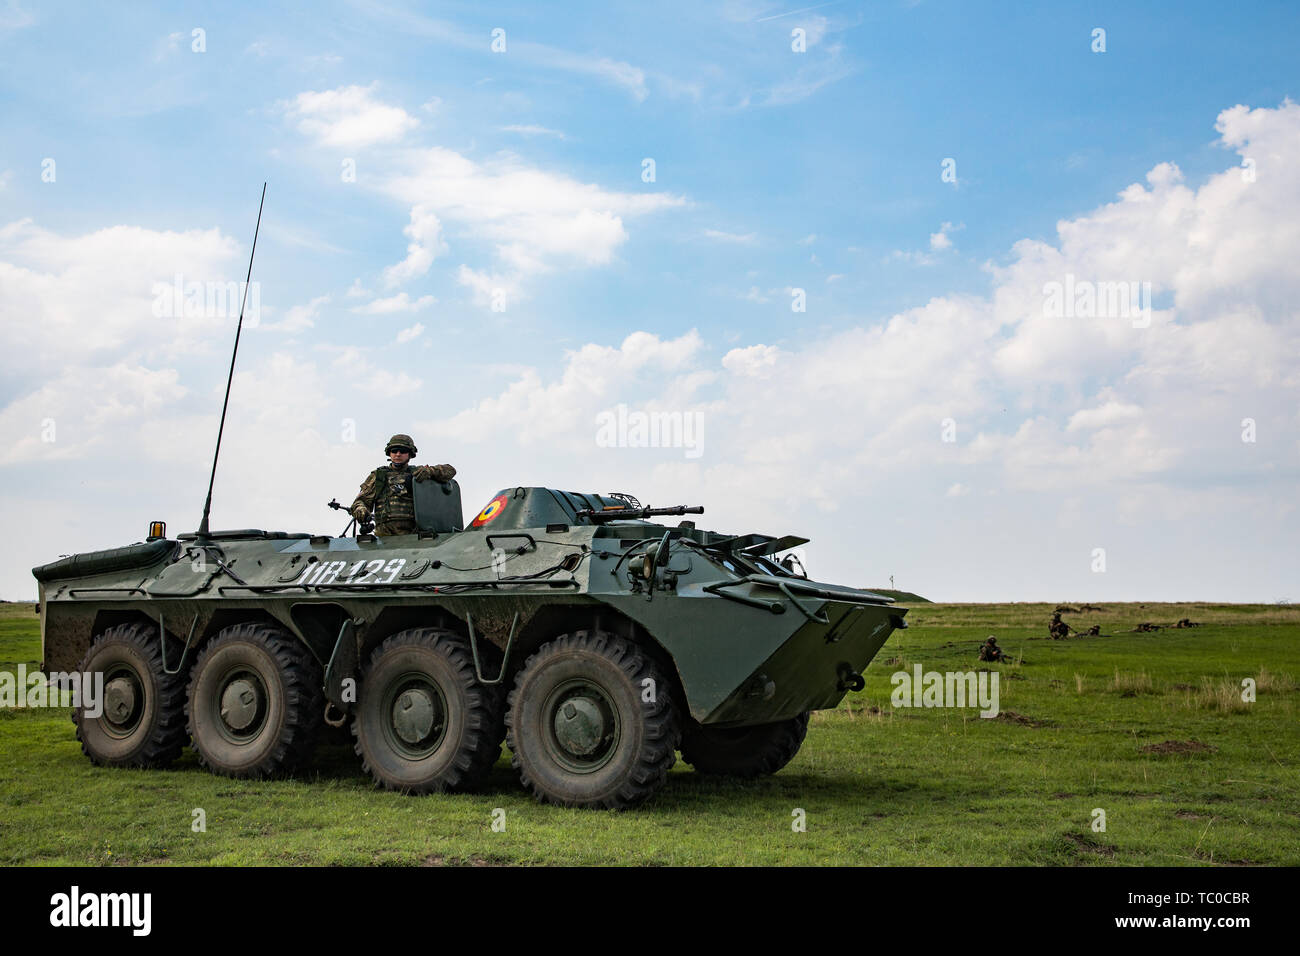 A Romanian soldier with the 631st Tank Battalion mounted in a TAB-77 personnel carrier surveys the area during a force on force exercise as part of Justice Eagle on a range near Smardan Training Area, Romania May 30, 2019. Justice Eagle, a combined bilateral exercise with Romanian allies, demonstrates the interoperability of NATO allies during Atlantic Resolve. (U.S. Army Photo by Sgt. Jeremiah Woods) Stock Photo